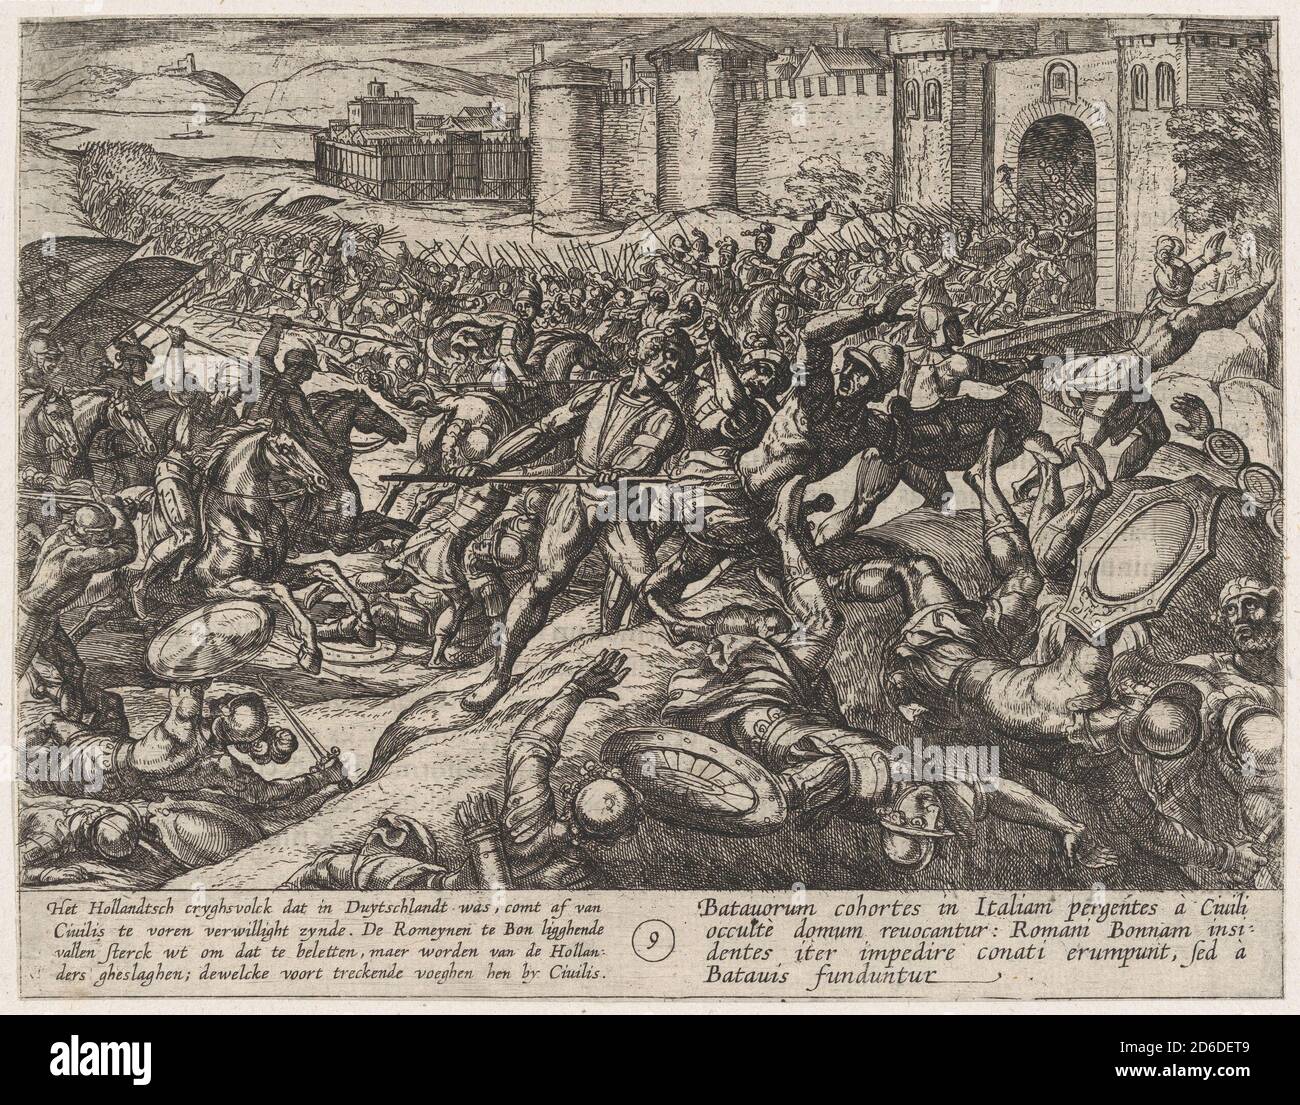 Plate 9: The Romans Defeated by the Dutch Troops at Bonna, from The War of the Romans Against the Batavians (Romanorvm et Batavorvm societas), 1611. Stock Photo